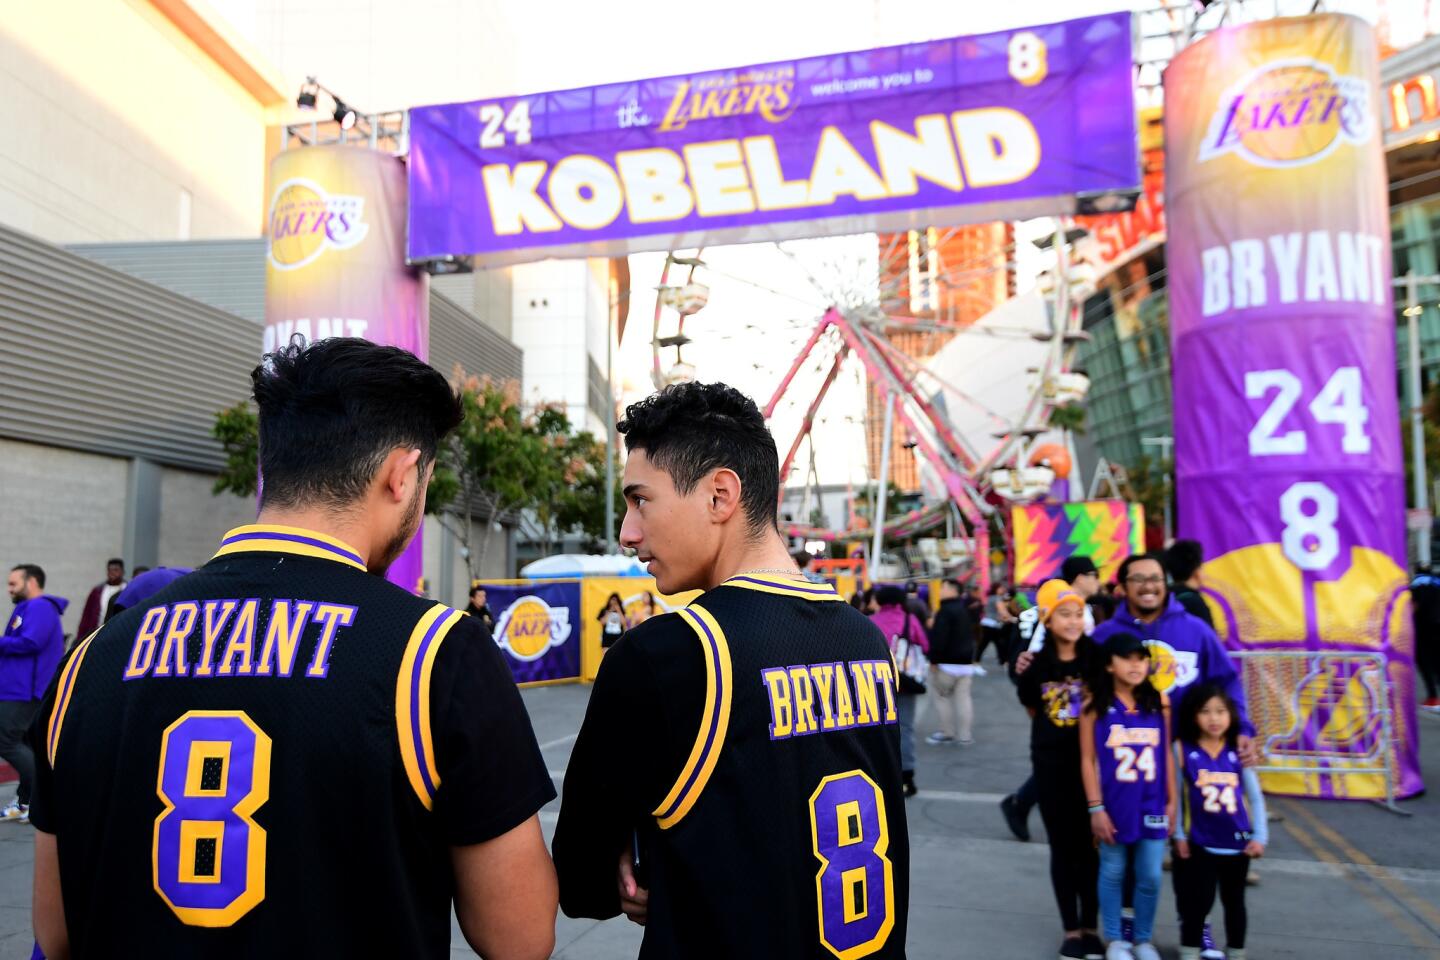 LOS ANGELES, CA - DECEMBER 18: Fans come out to Kobeland before a jersey retirement ceremony for Kobe Bryant'S #8 and #24 of the Los Angeles Lakers at Staples Center on December 18, 2017 in Los Angeles, California. (Photo by Harry How/Getty Images) ** OUTS - ELSENT, FPG, CM - OUTS * NM, PH, VA if sourced by CT, LA or MoD **